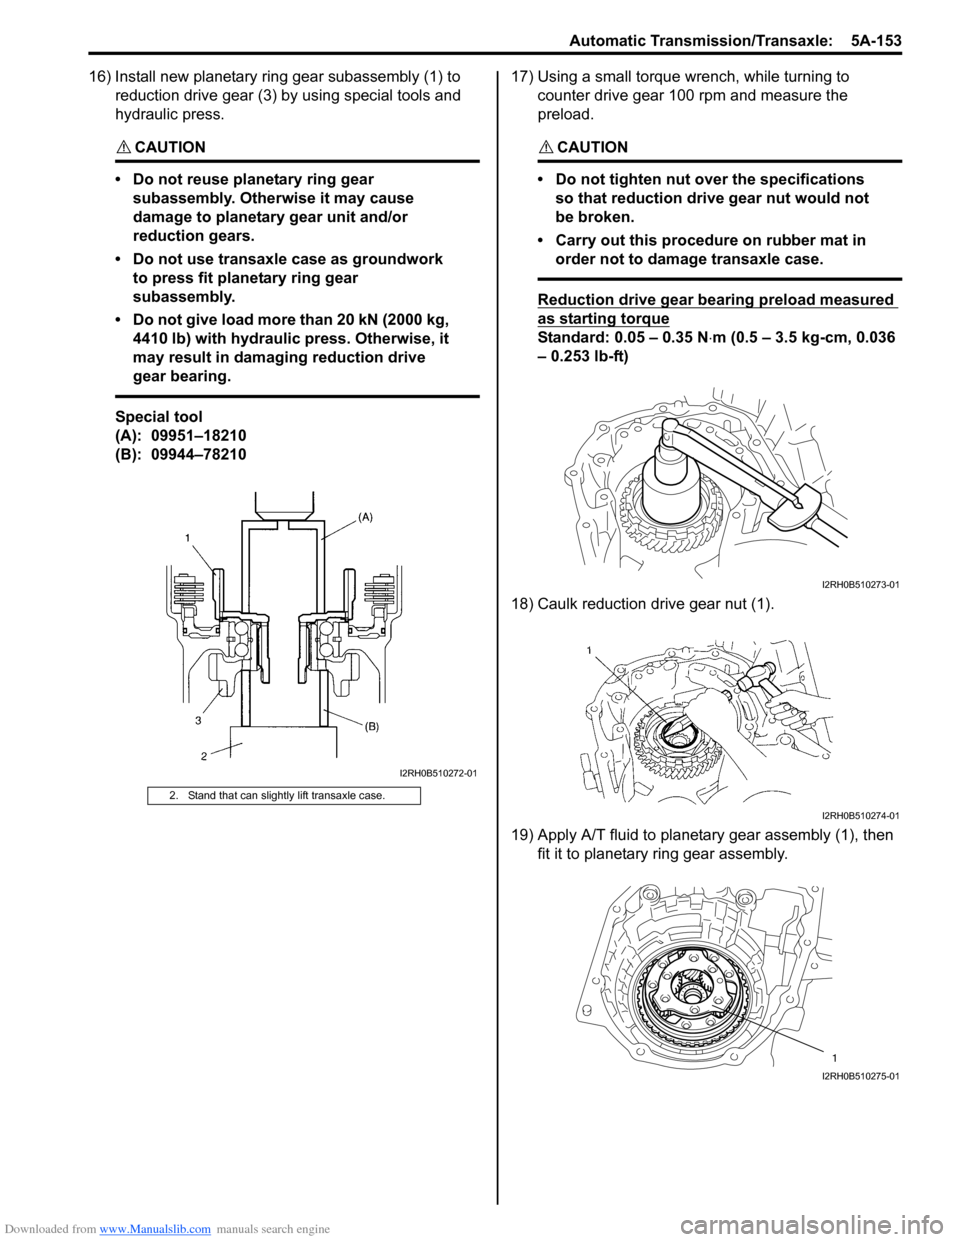 SUZUKI SWIFT 2004 2.G Service Service Manual Downloaded from www.Manualslib.com manuals search engine Automatic Transmission/Transaxle:  5A-153
16) Install new planetary ring gear subassembly (1) to reduction drive gear (3) by using special tool